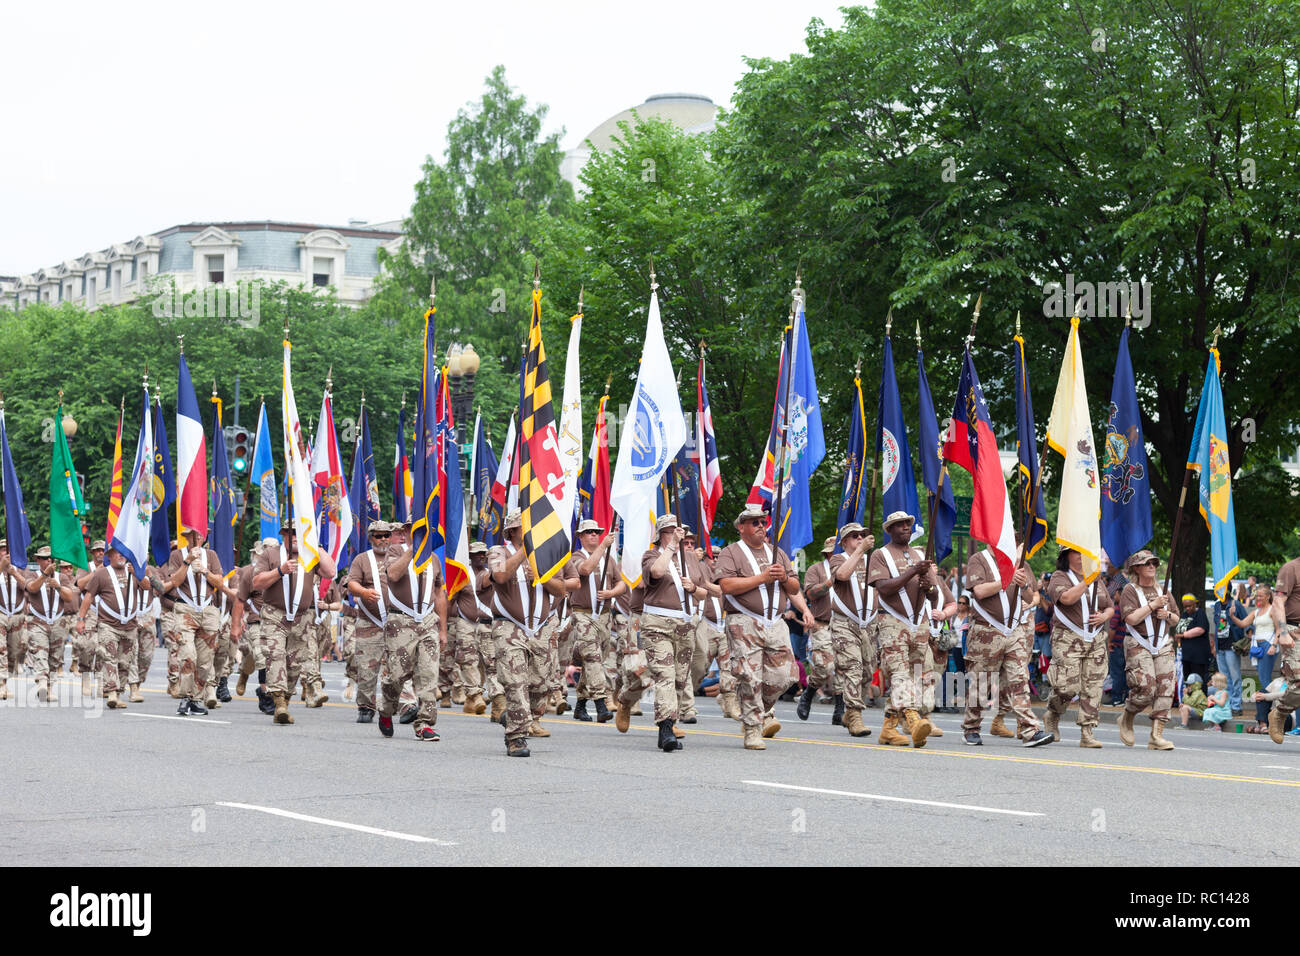 Washington, D.C., USA - May 28, 2018: The National Memorial Day Parade, Veterans of Operation Desert Storm, marching down consitution Avenue Stock Photo